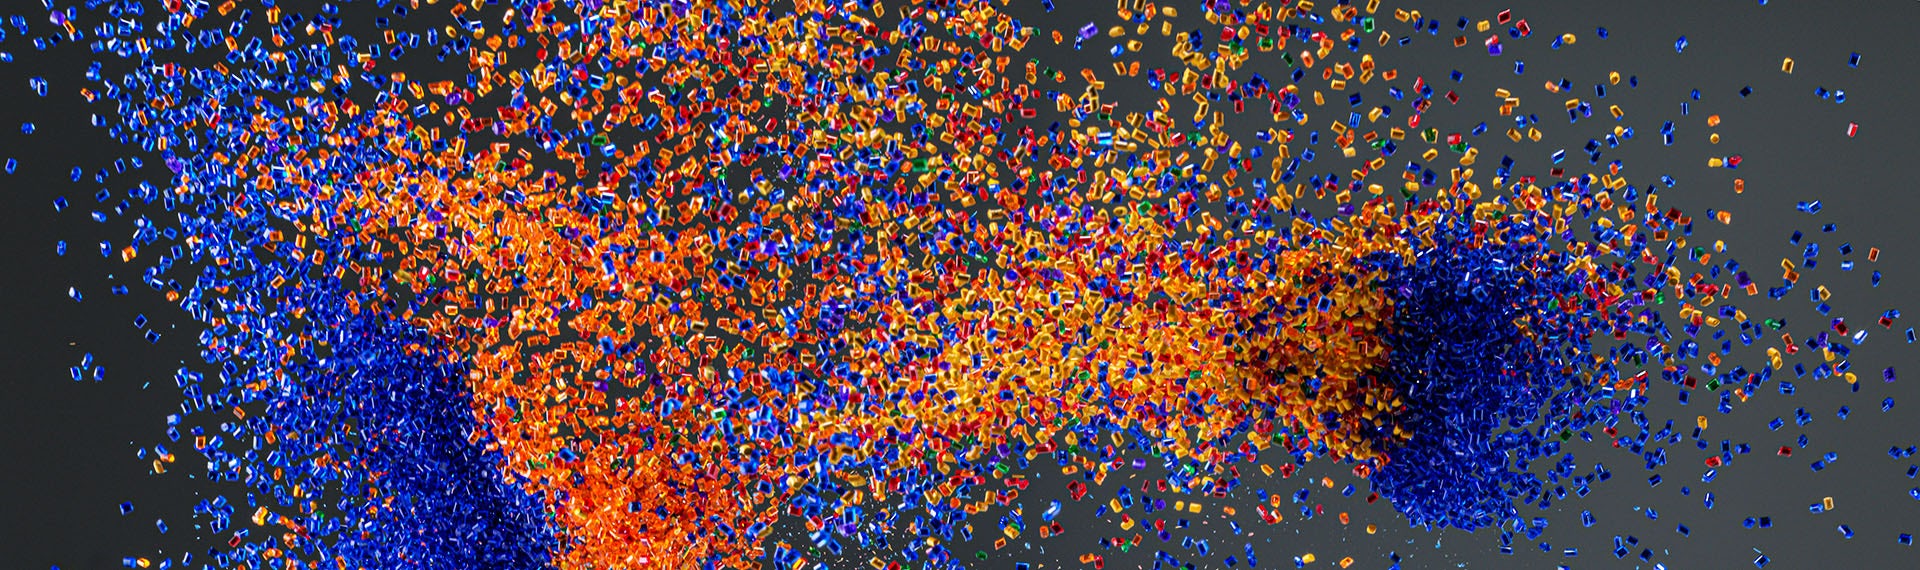 A 3d image of a blue, orange, and yellow splatter.